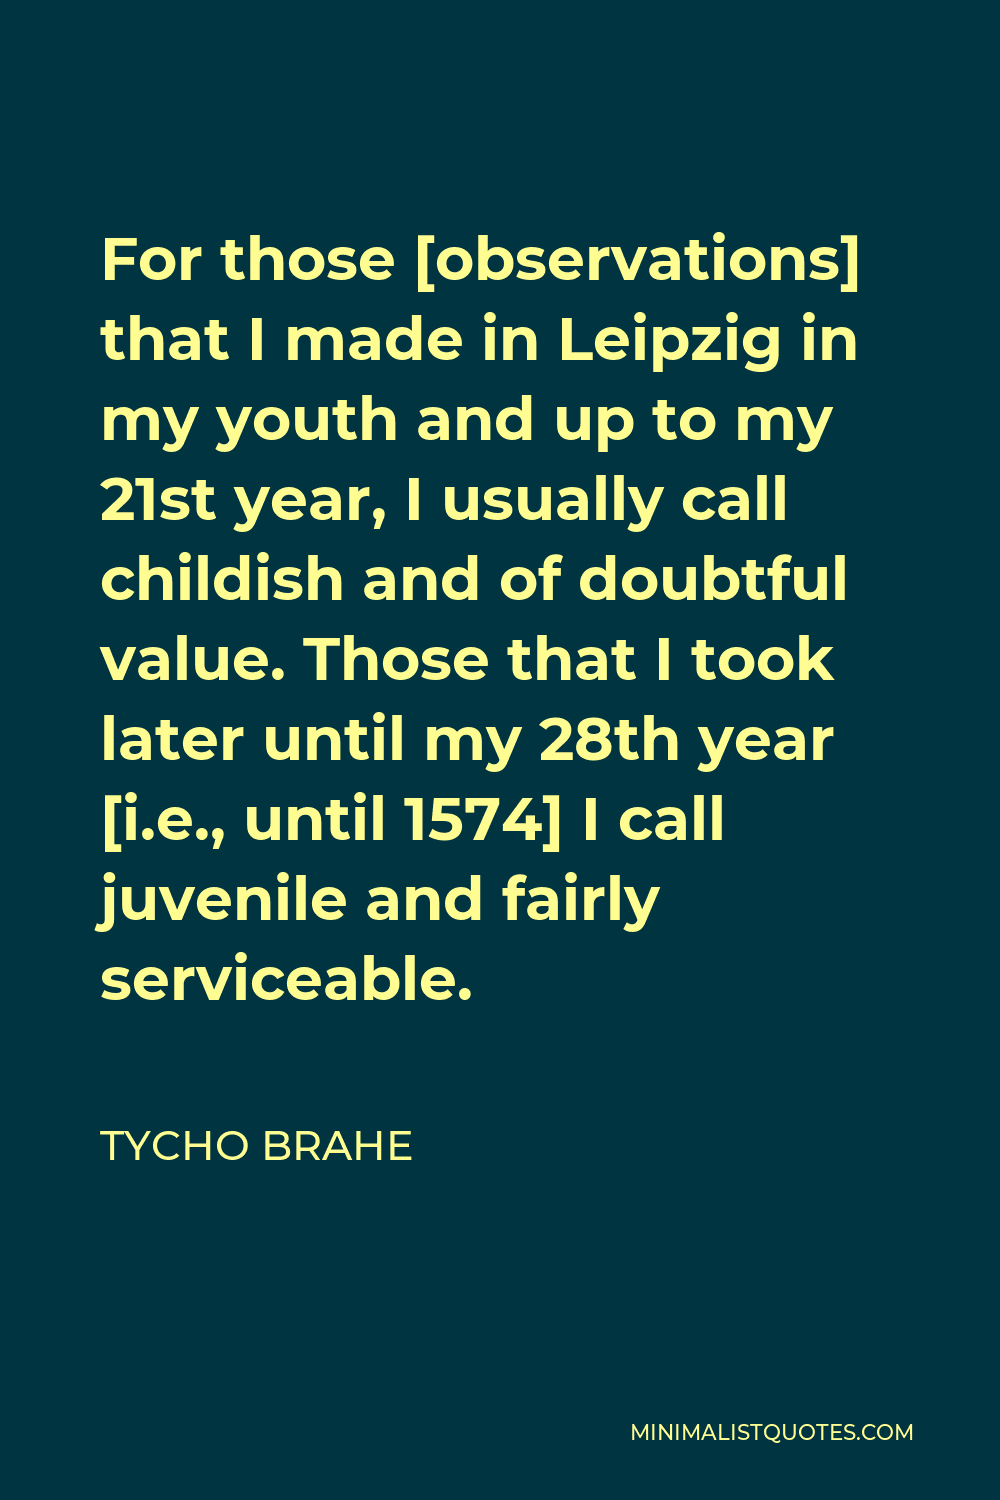 Tycho Brahe Quote - For those [observations] that I made in Leipzig in my youth and up to my 21st year, I usually call childish and of doubtful value. Those that I took later until my 28th year [i.e., until 1574] I call juvenile and fairly serviceable.